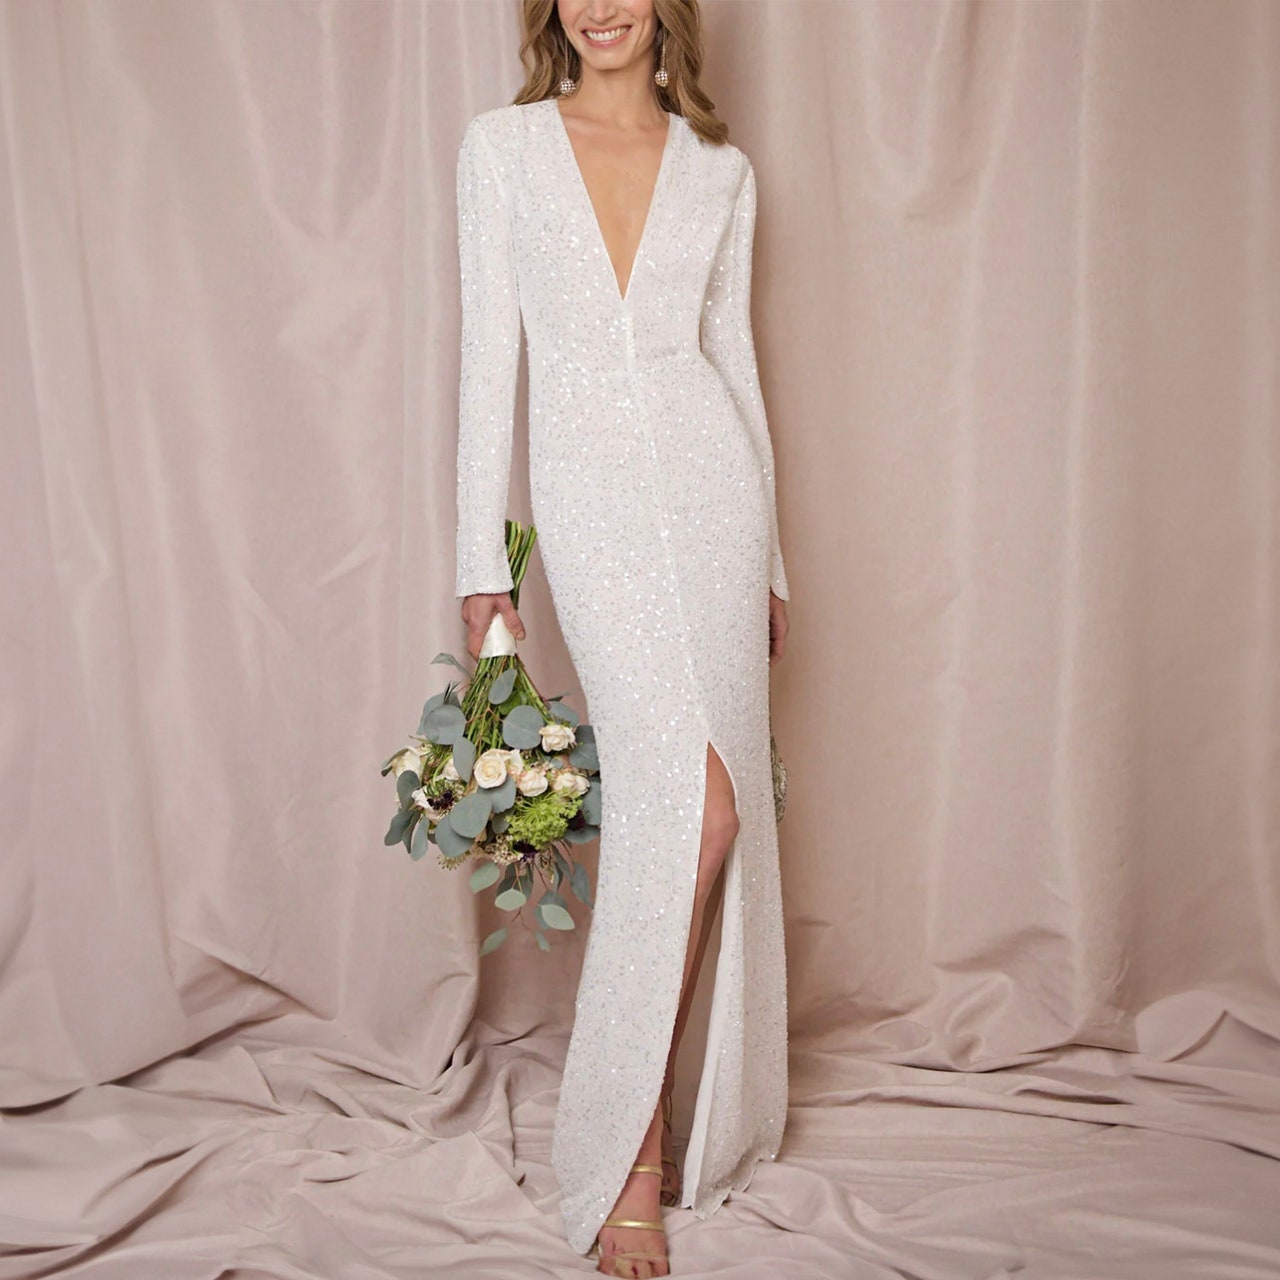 Looking for high street wedding dresses? These are all less than £1,000